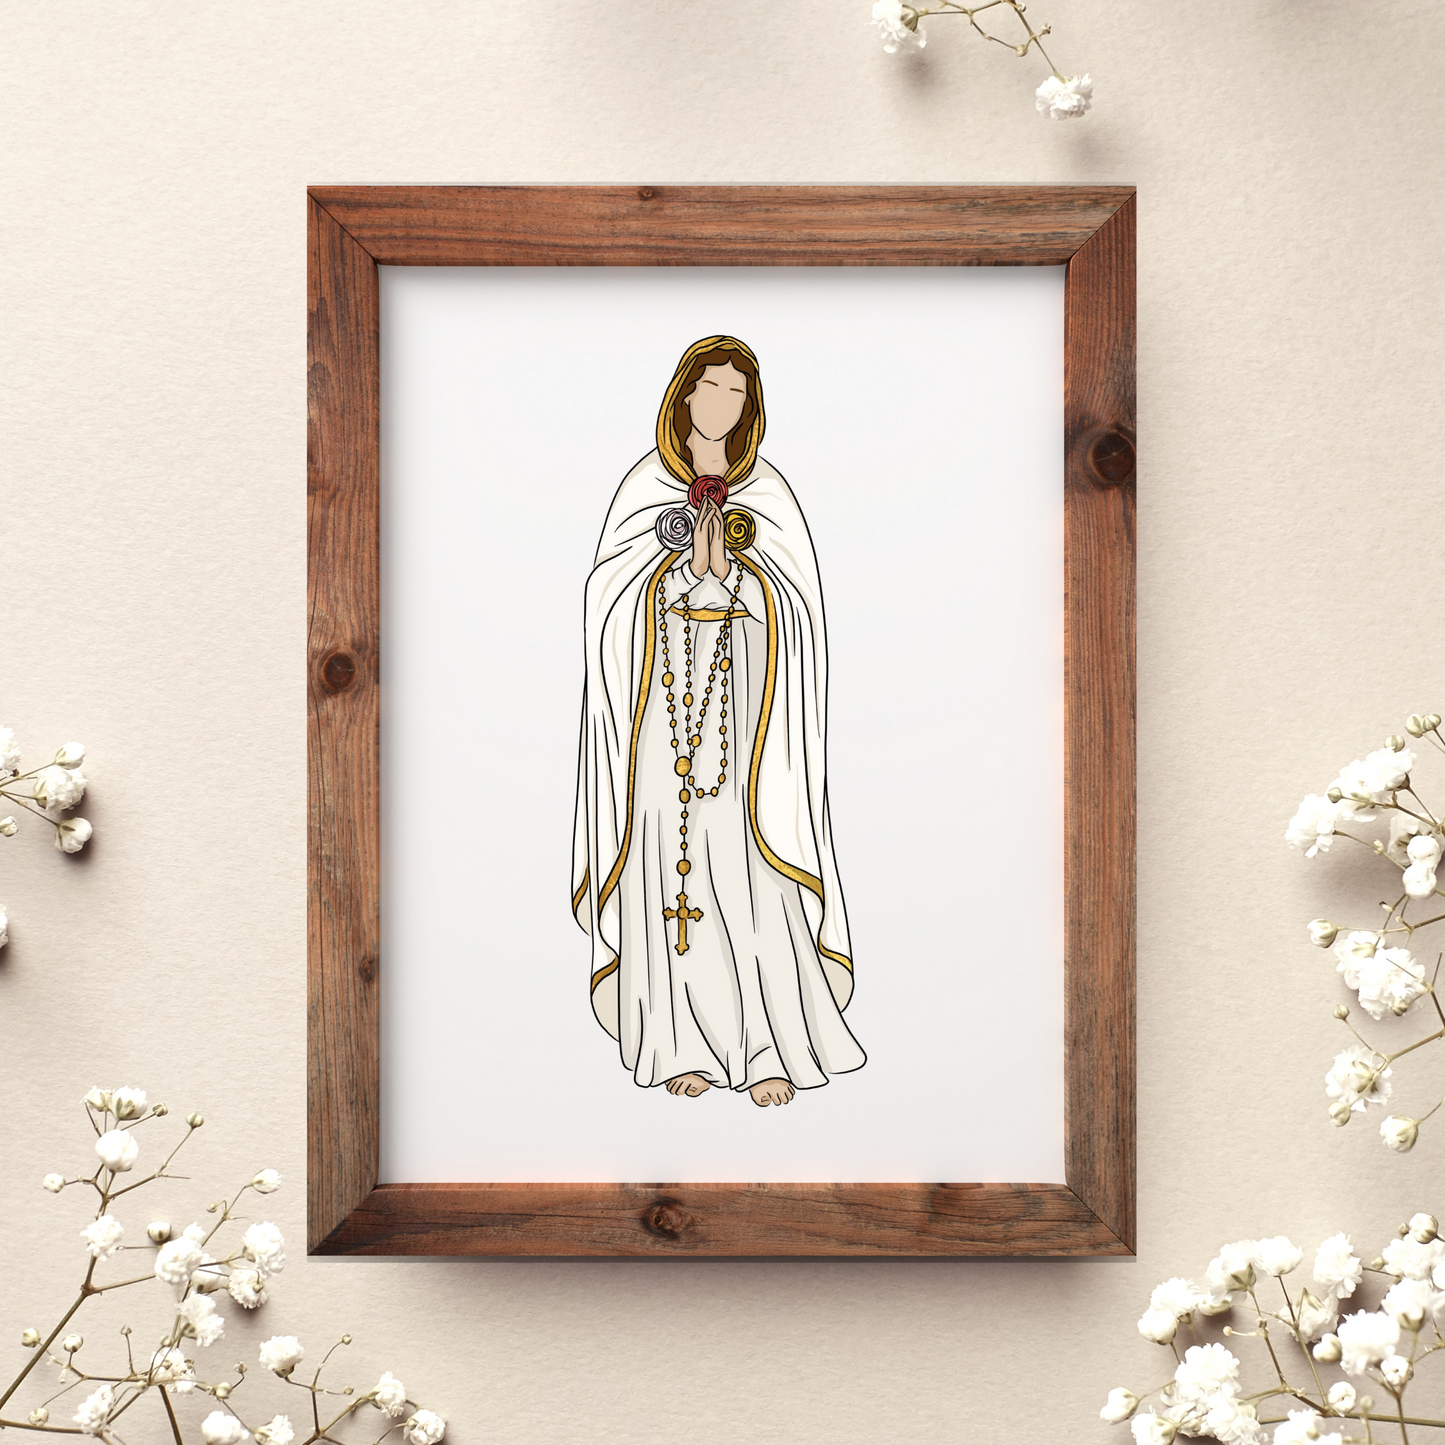 Our Lady of the Mystical Rose - 5"x7" Print